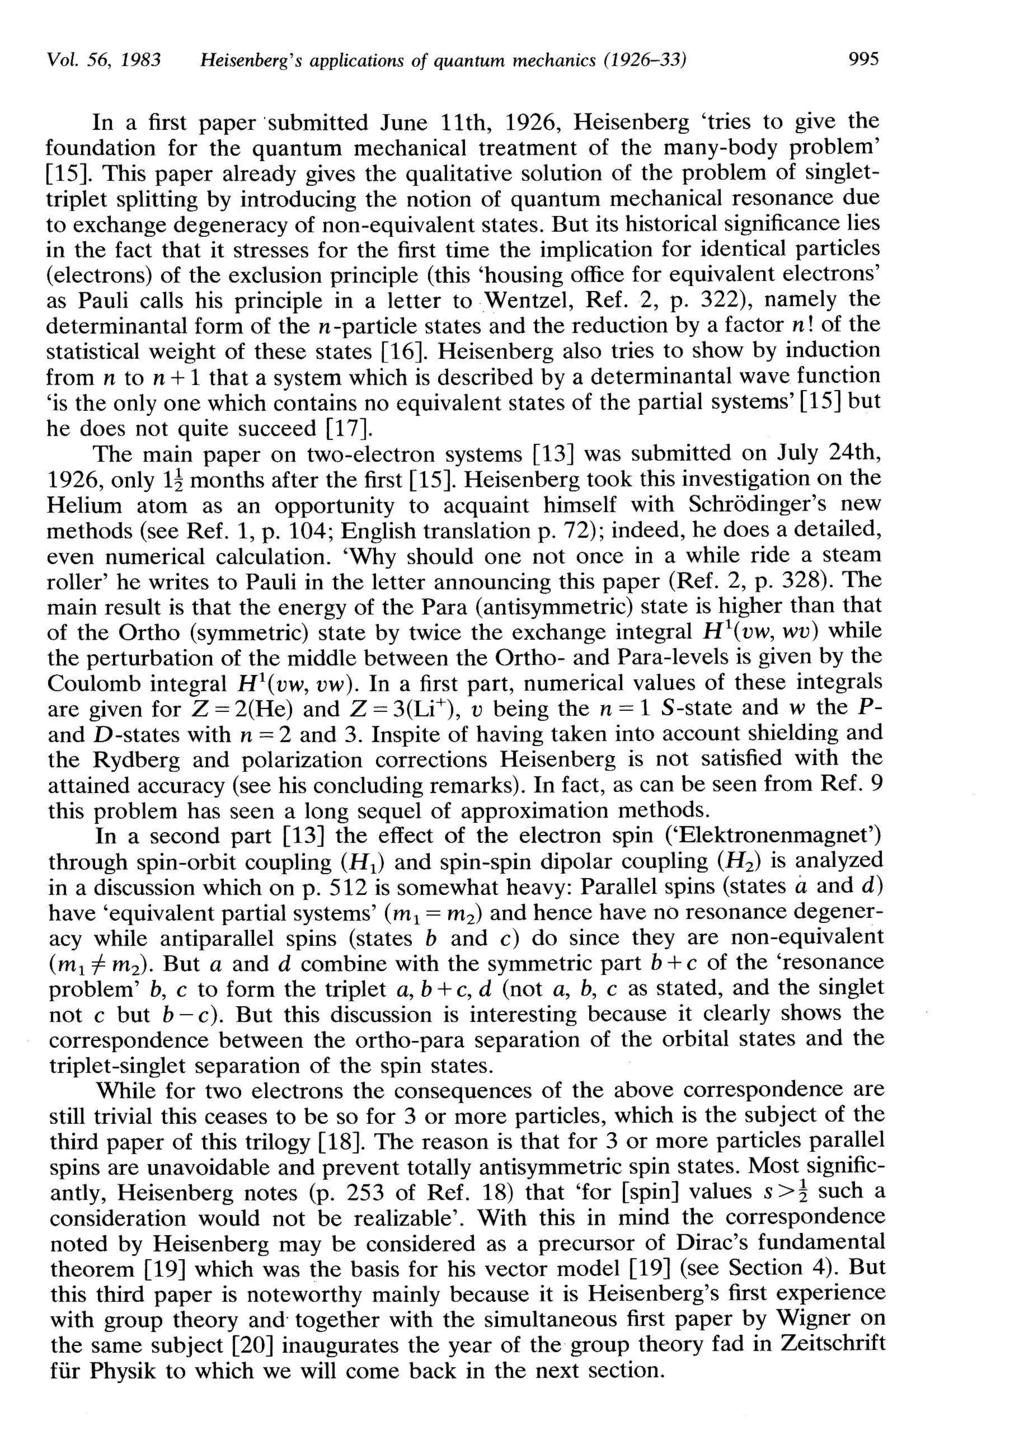 Vol. 56, 1983 Heisenberg's applications of quantum mechanics (1926-33) 995 In a first paper submitted June 11th, 1926, Heisenberg 'tries to give the foundation for the quantum mechanical treatment of